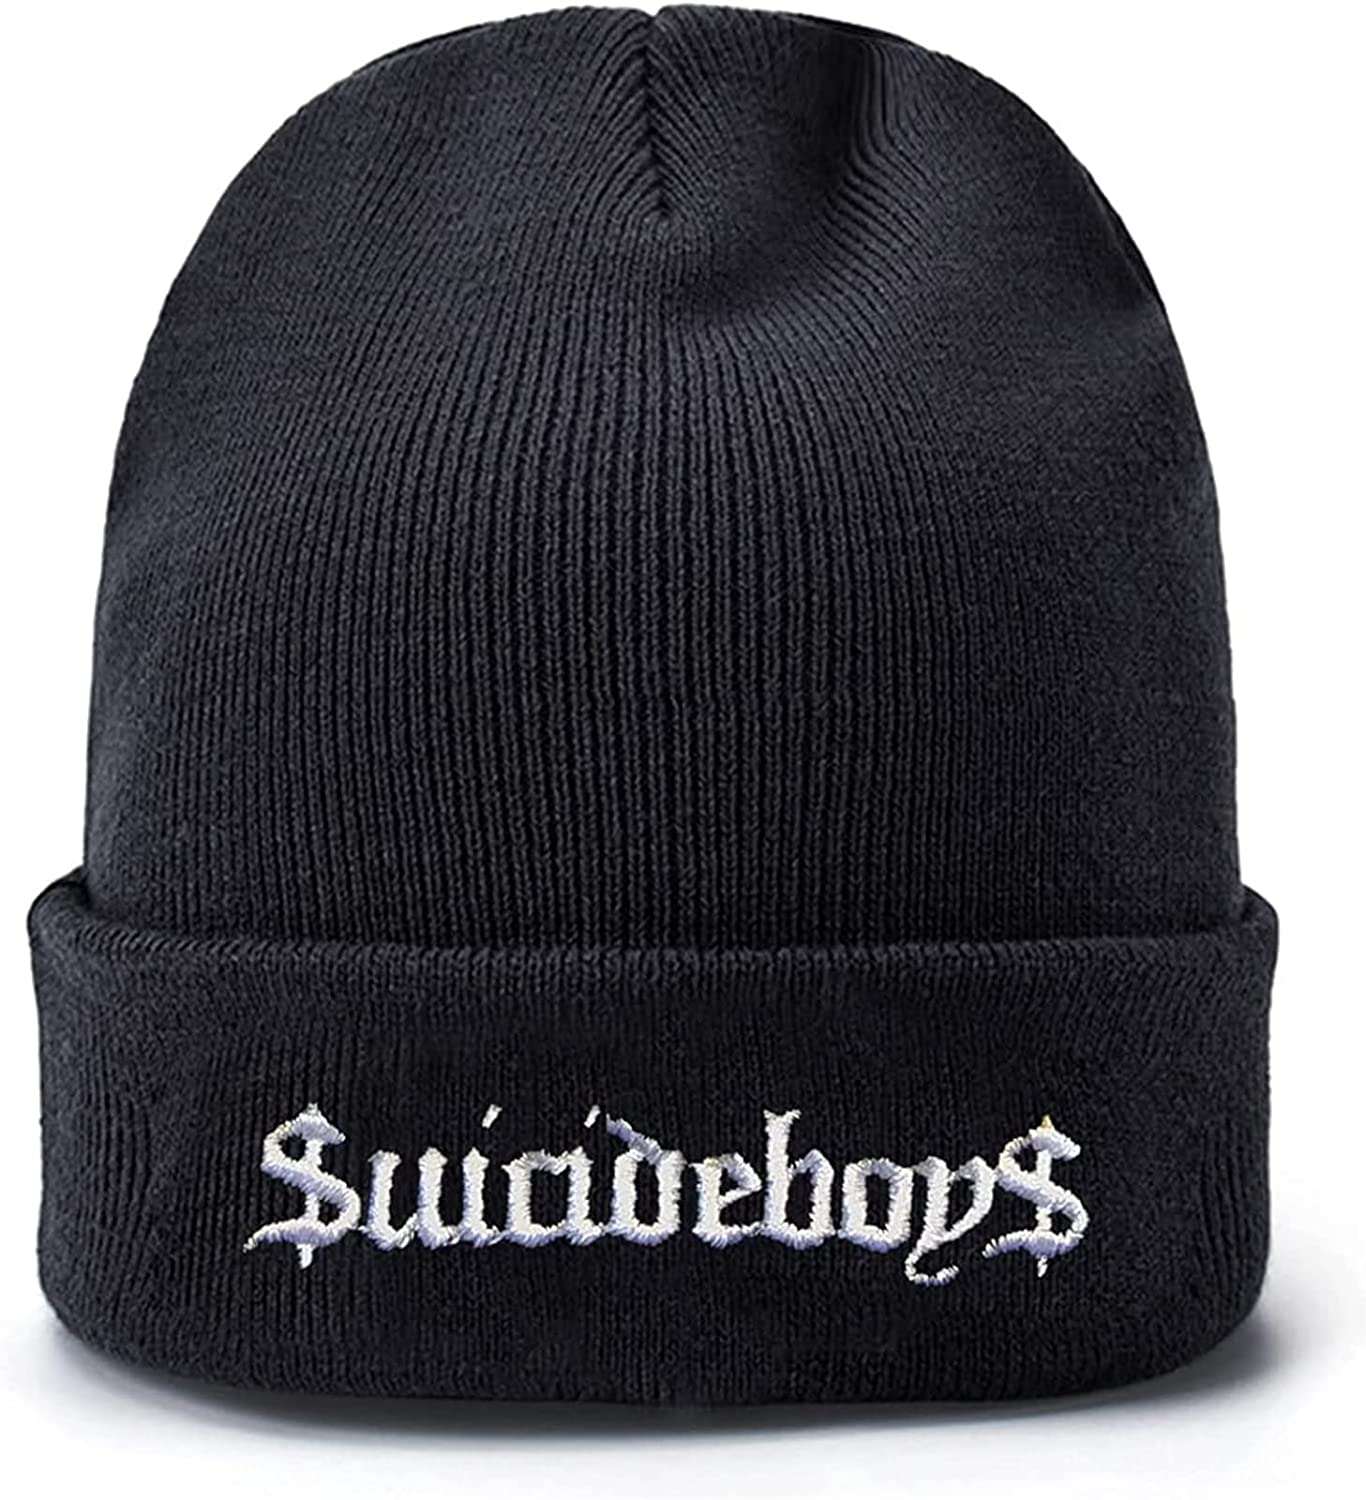 gogoherhome Suicide Logo Boys Cap Embroidered Warm Stretchy Beanie Black Toboggan Weather Cold Soft Hats for Men for Women Knit